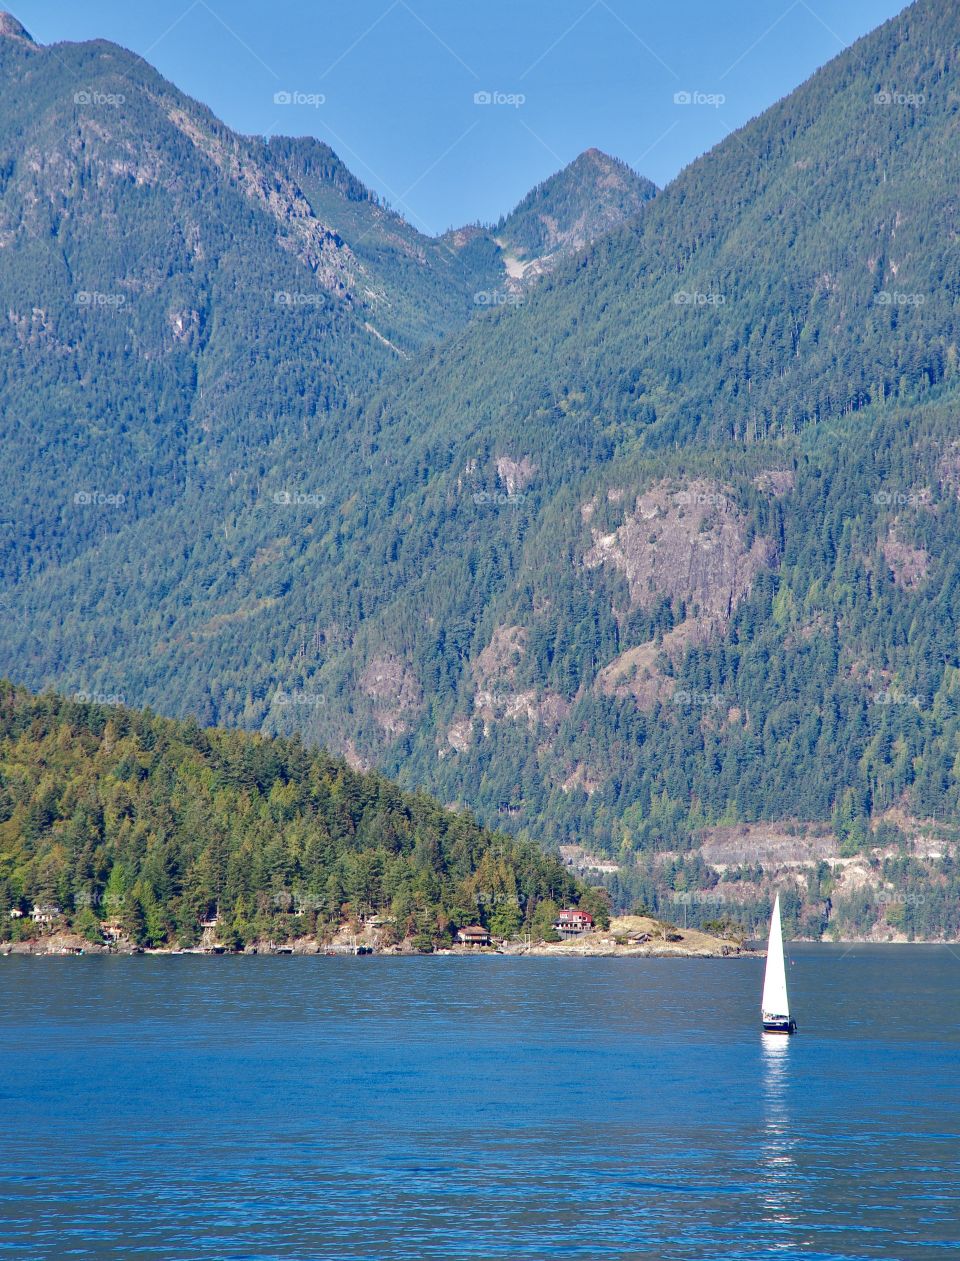 Exterior daylight.  On the ferry near Horshoe Bay, BC, CA.  A single sailboat navigates blue water.  Mountains in background.